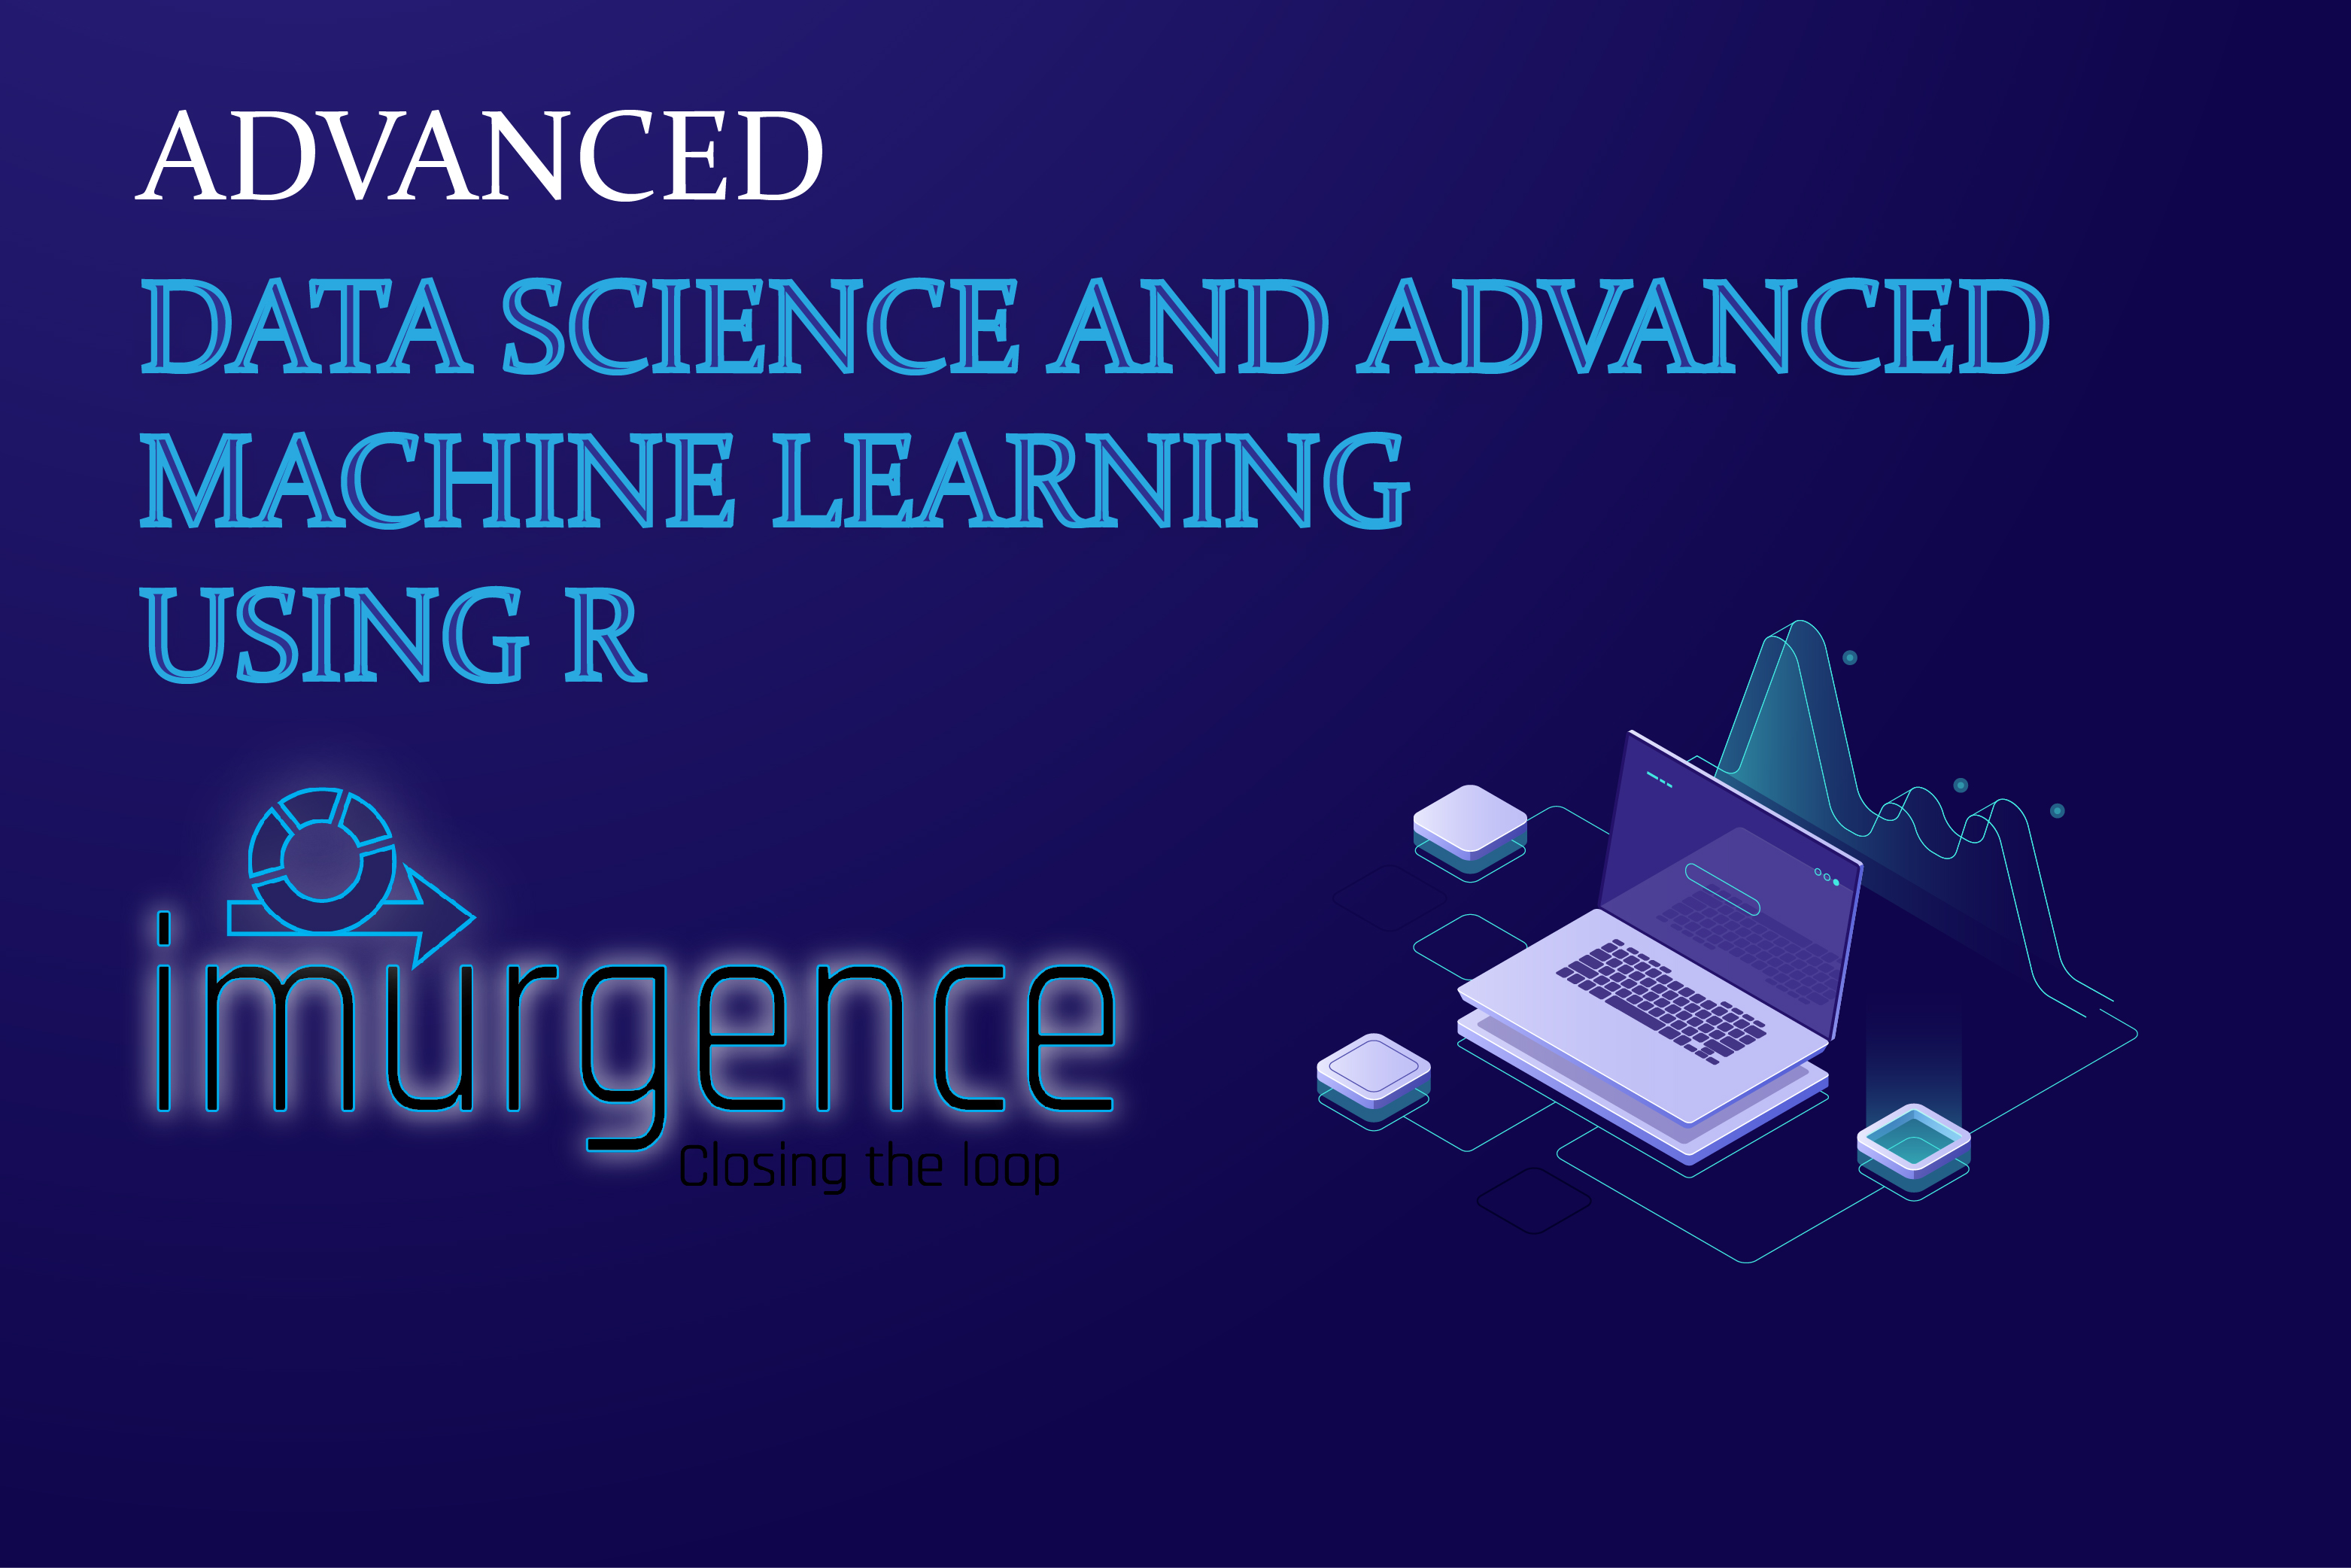 Certificate Program in Data Science & Advanced Machine Learning using R